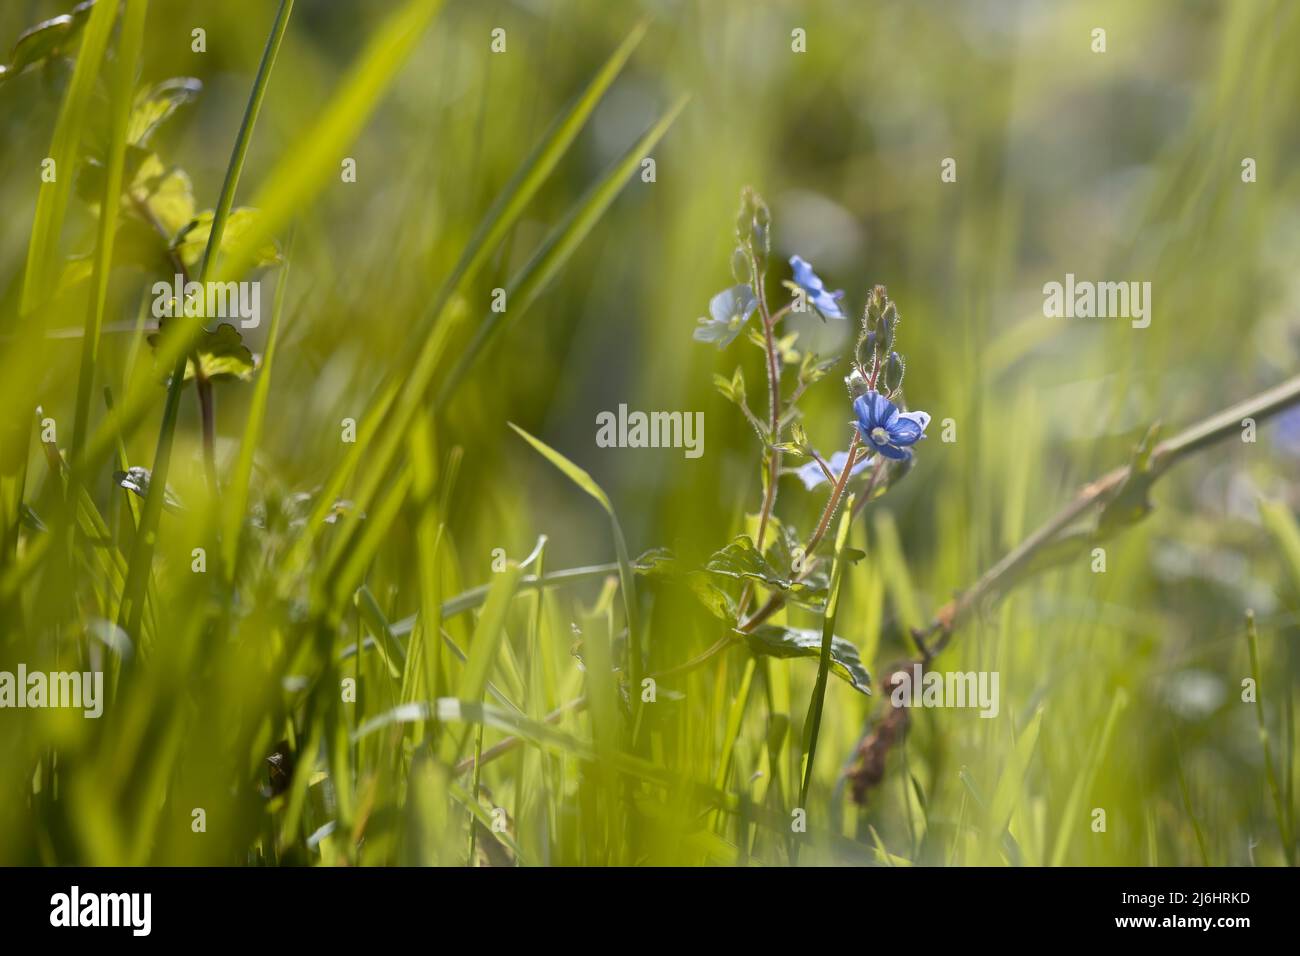 macro photography in a grassy field in sunlight with bluish flowers. space for copy. floral backgrounds. nature view Stock Photo